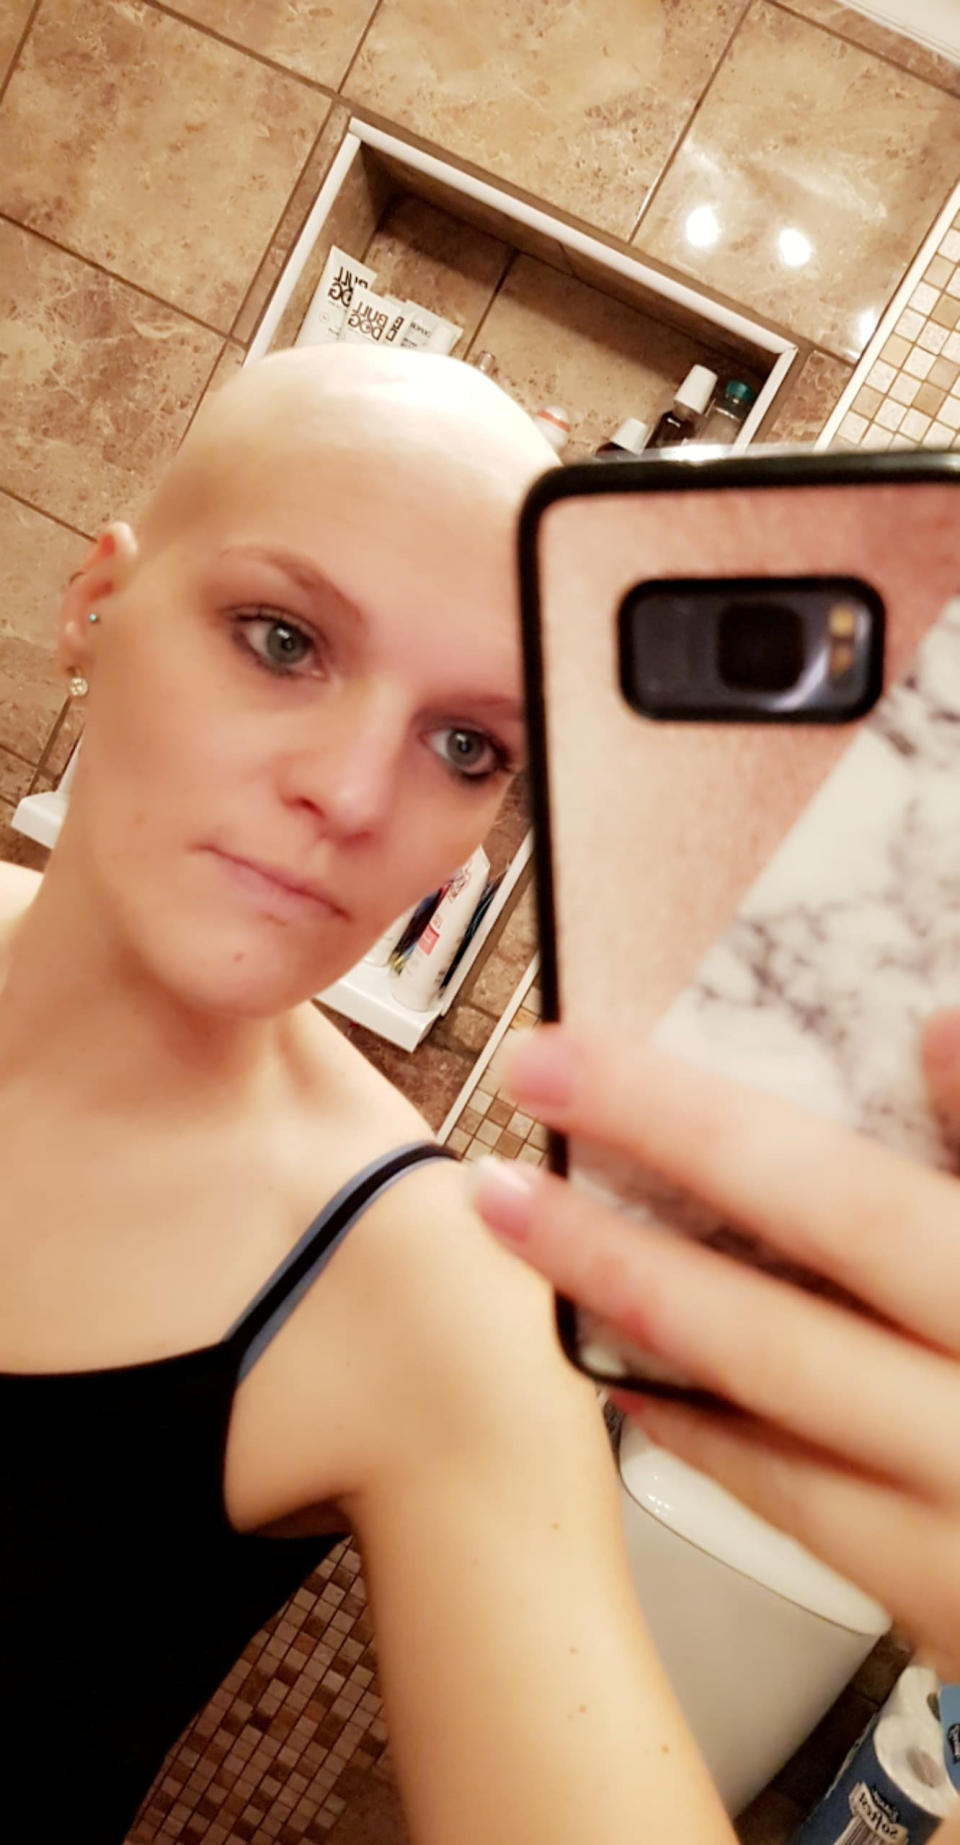 ***EMBARGOED 2PM BST / 10AM EST OCTOBER 29 2019***    Claire Curtis after losing her hair. Claire Curtis, 30, who believed her headaches and general lethargy were down to baby brain was shocked to discover she actually had an incurable brain tumour. See SWNS story SWOCbabybrain. A new mum who put her headaches and tiredness down to 'baby brain' was devastated to discover she actually had an incurable brain tumour. Claire Curtis, 30, had been experiencing headaches and feeling tired for a months before her diagnosis but just put it down to the stress of being a new mum. Doctors prescribed her medication for migraines, but when Claire started vomiting in the early hours of the morning, she knew it was something more sinister. An MRI scan revealed that Claire had an incurable brain tumour the size of an orange, and she is now battling the cancer to get more time with her family.